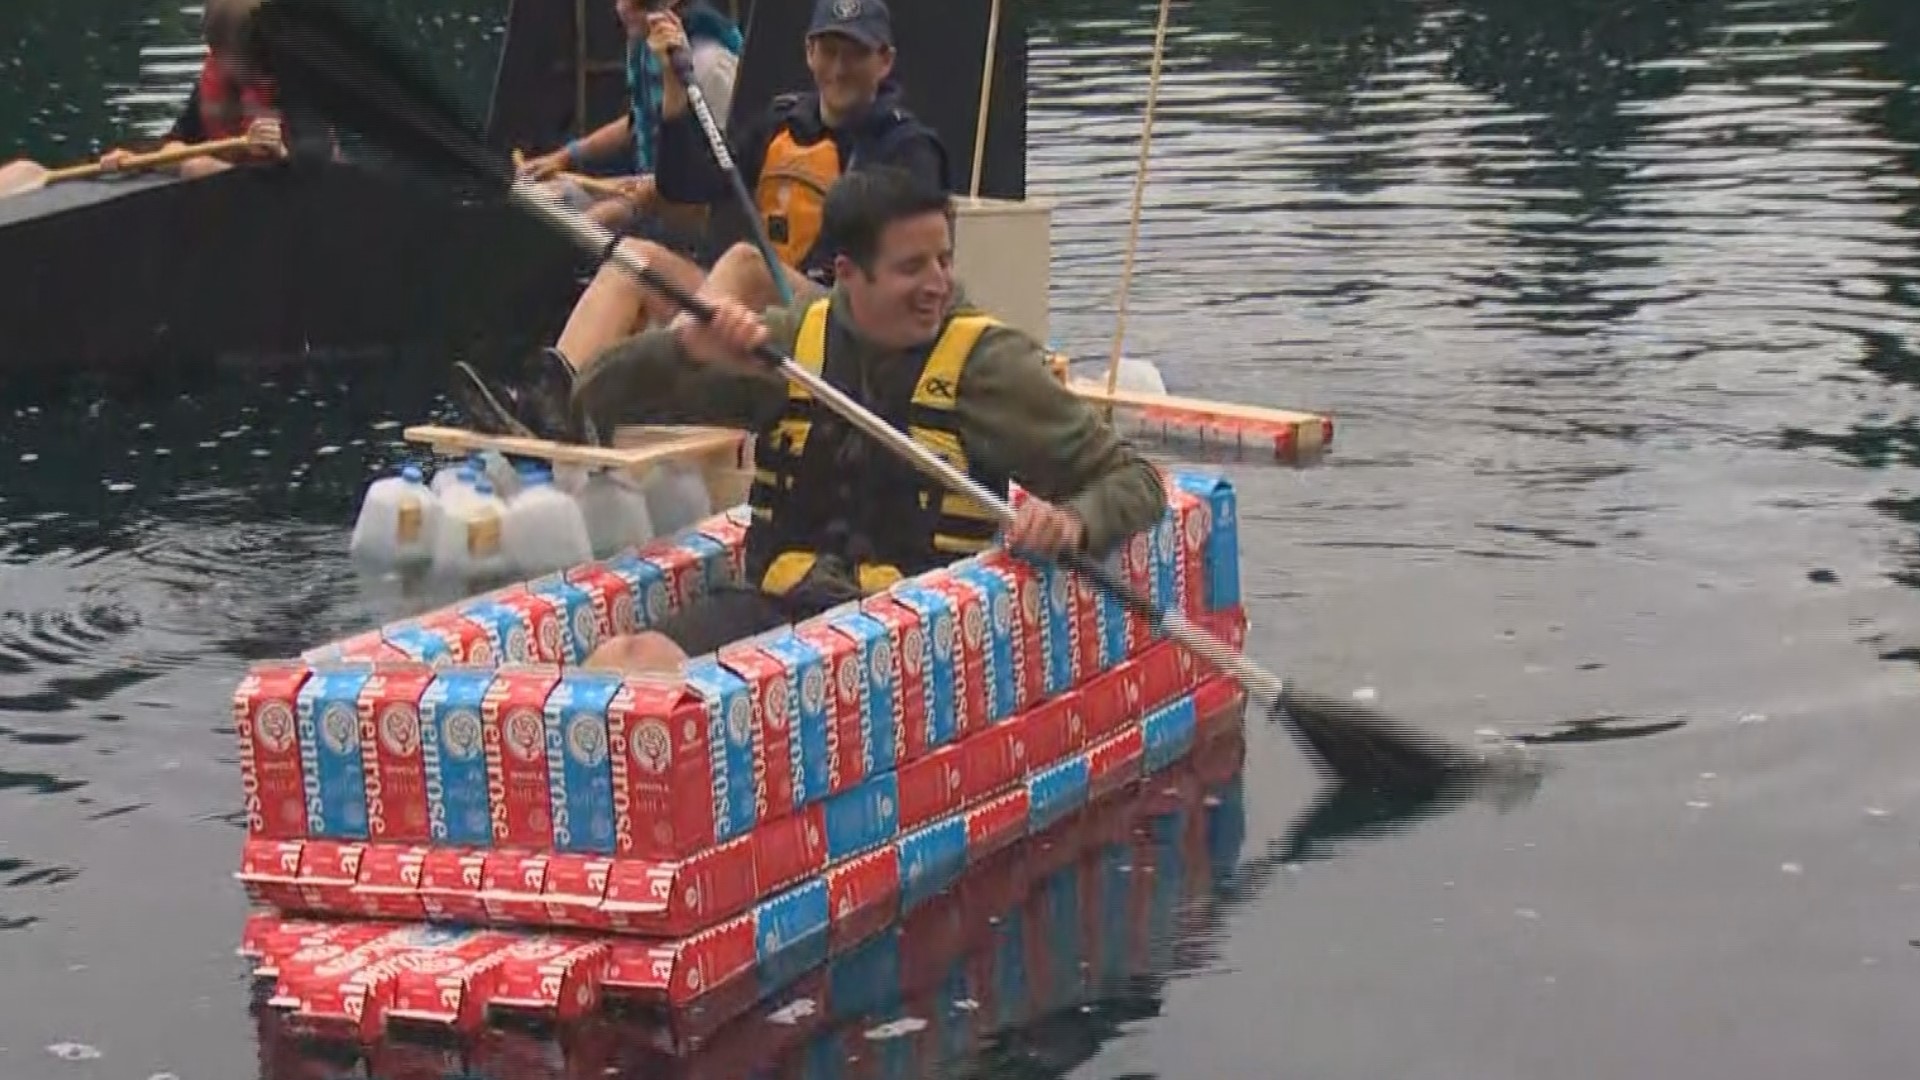 Families will take part in a friendly competion this Saturday: the Rose Festival's Milk Carton Boat Races. KGW Sunrise anchor Drew Carney hit the water.